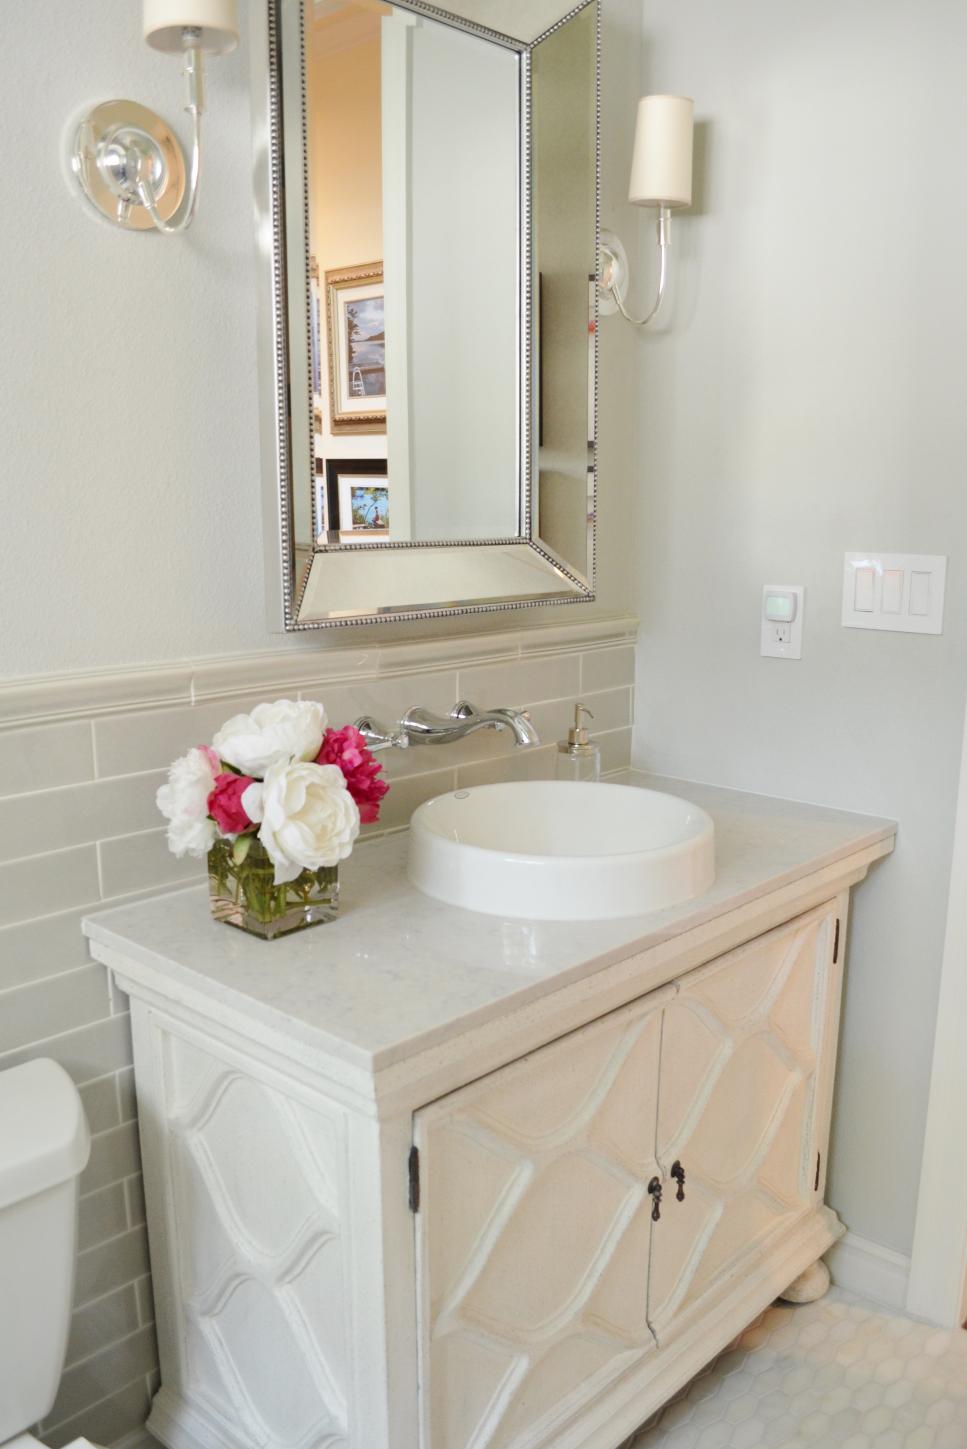 before-and-after bathroom remodels on a budget | hgtv FXBNYEH